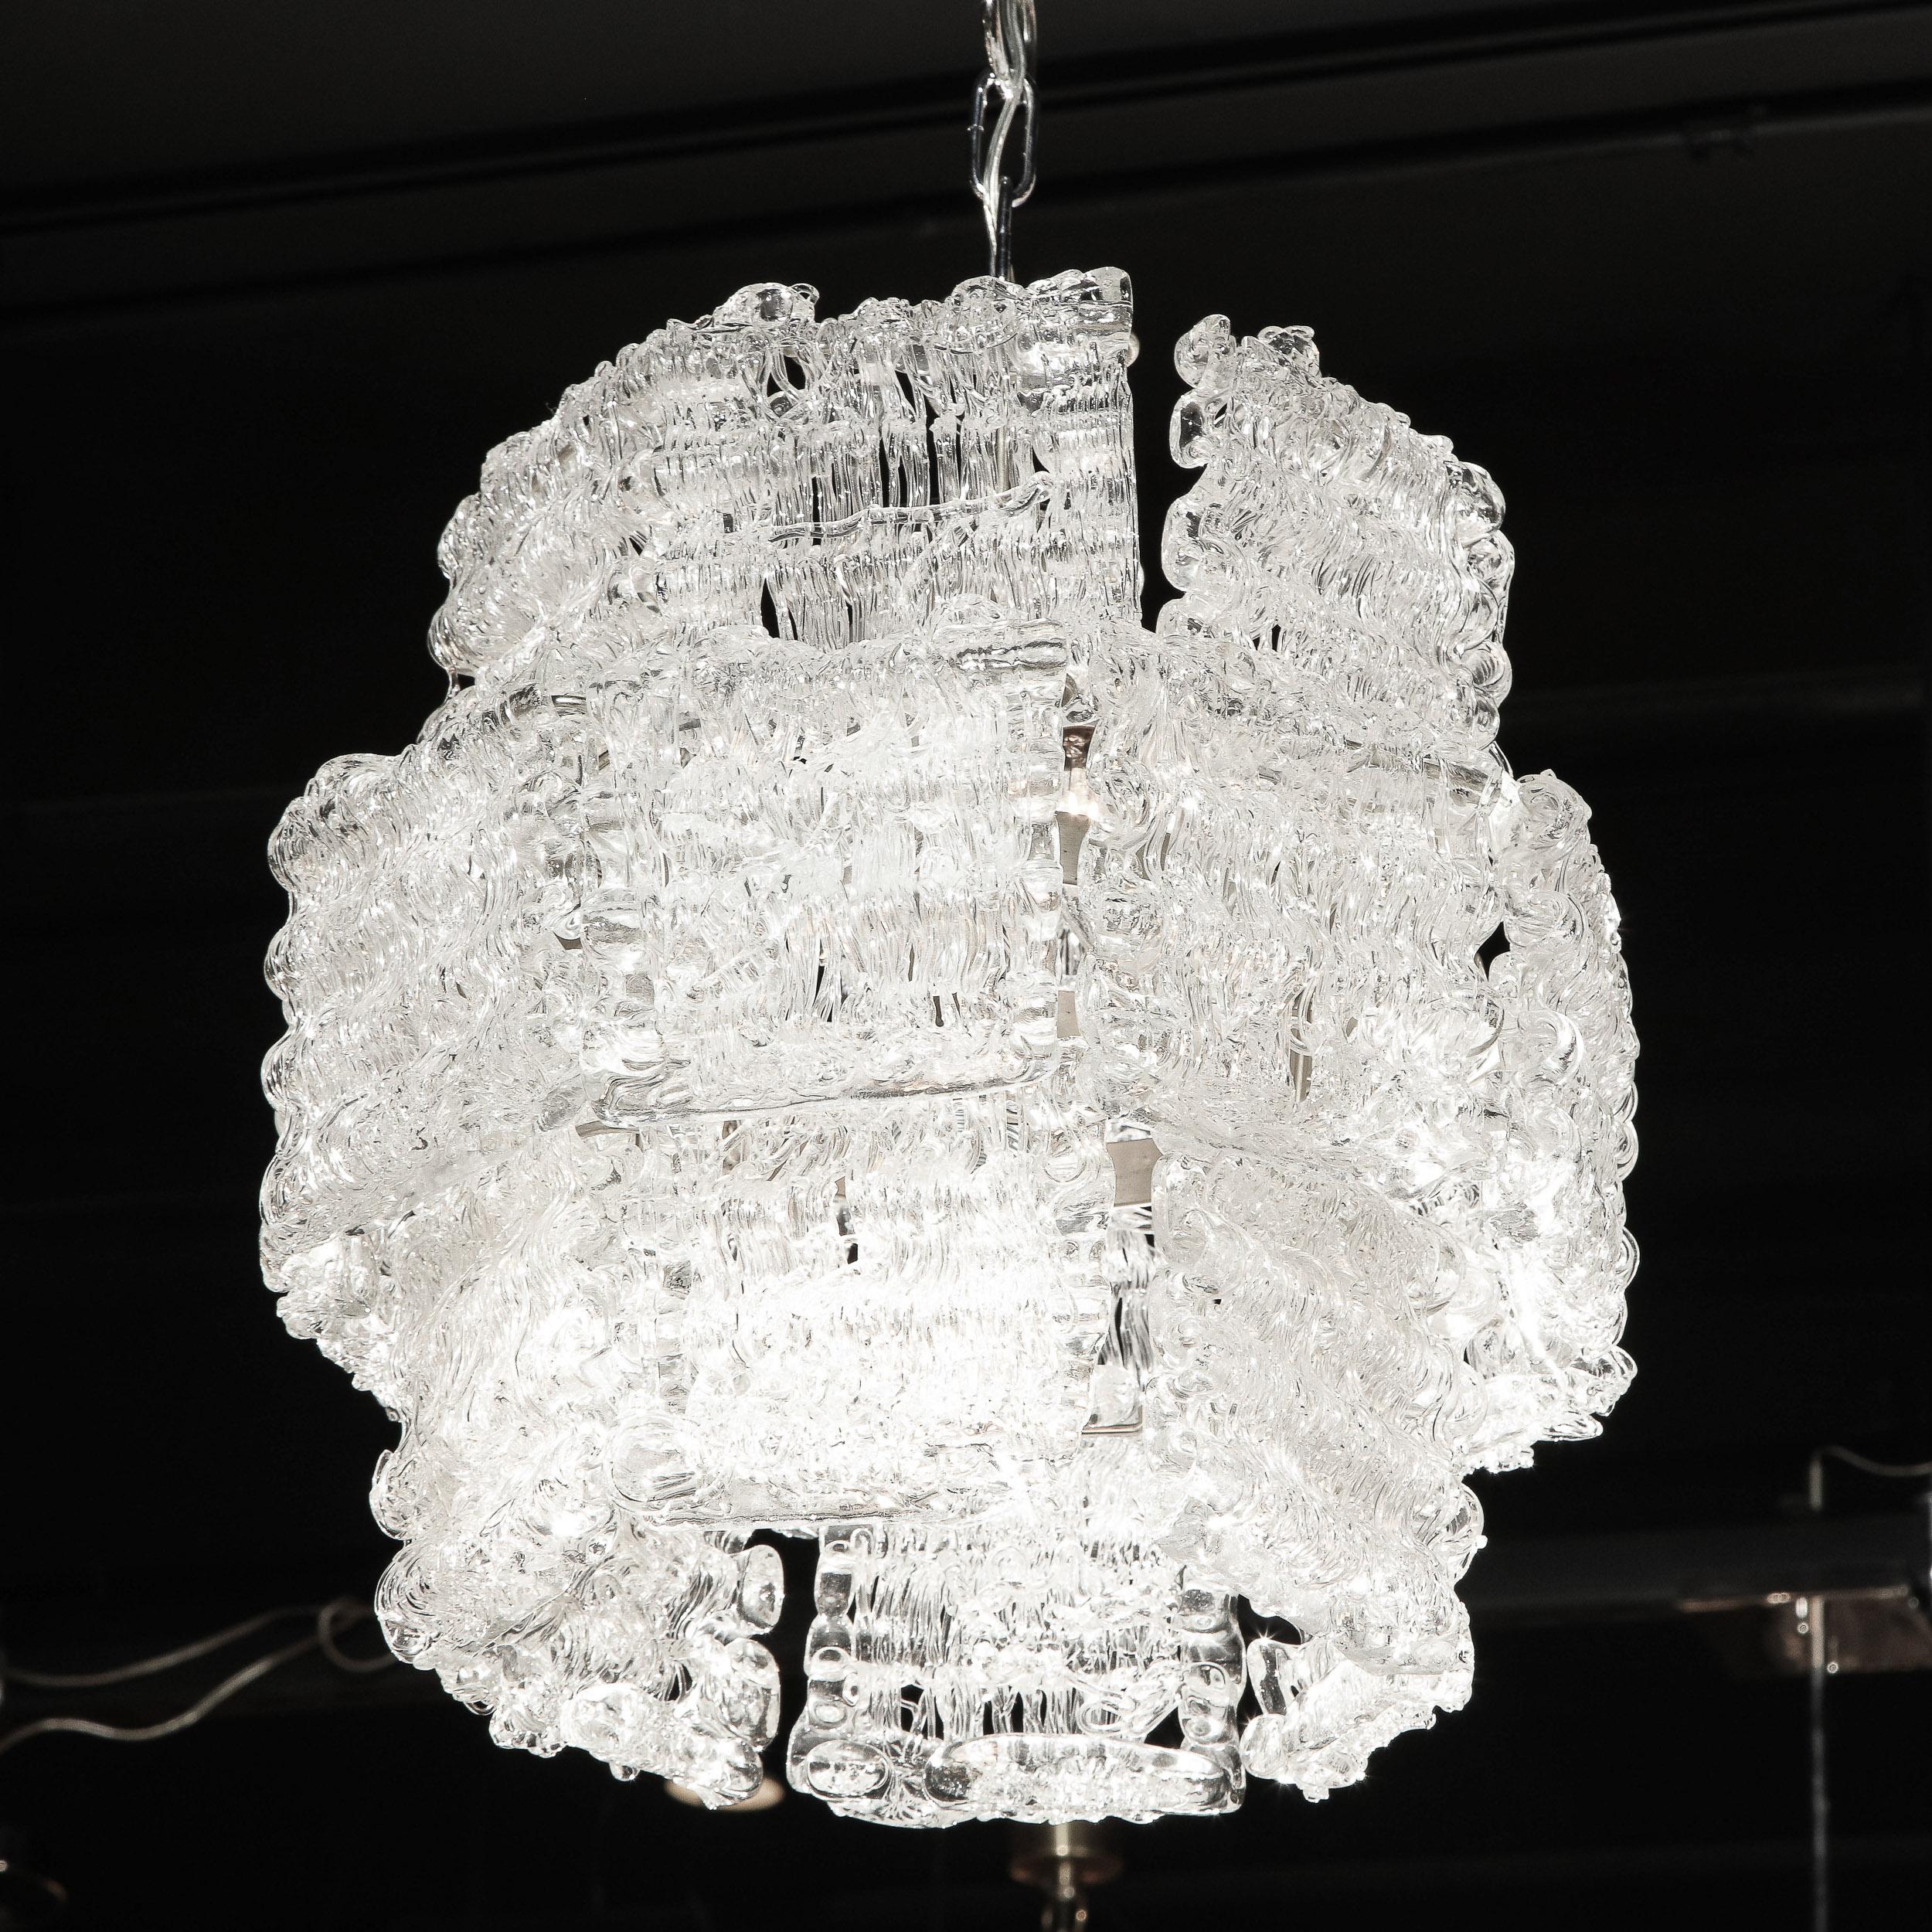 Late 20th Century Mid-Century Modern Textured Translucent Glass Chandelier with Chrome Fittings For Sale